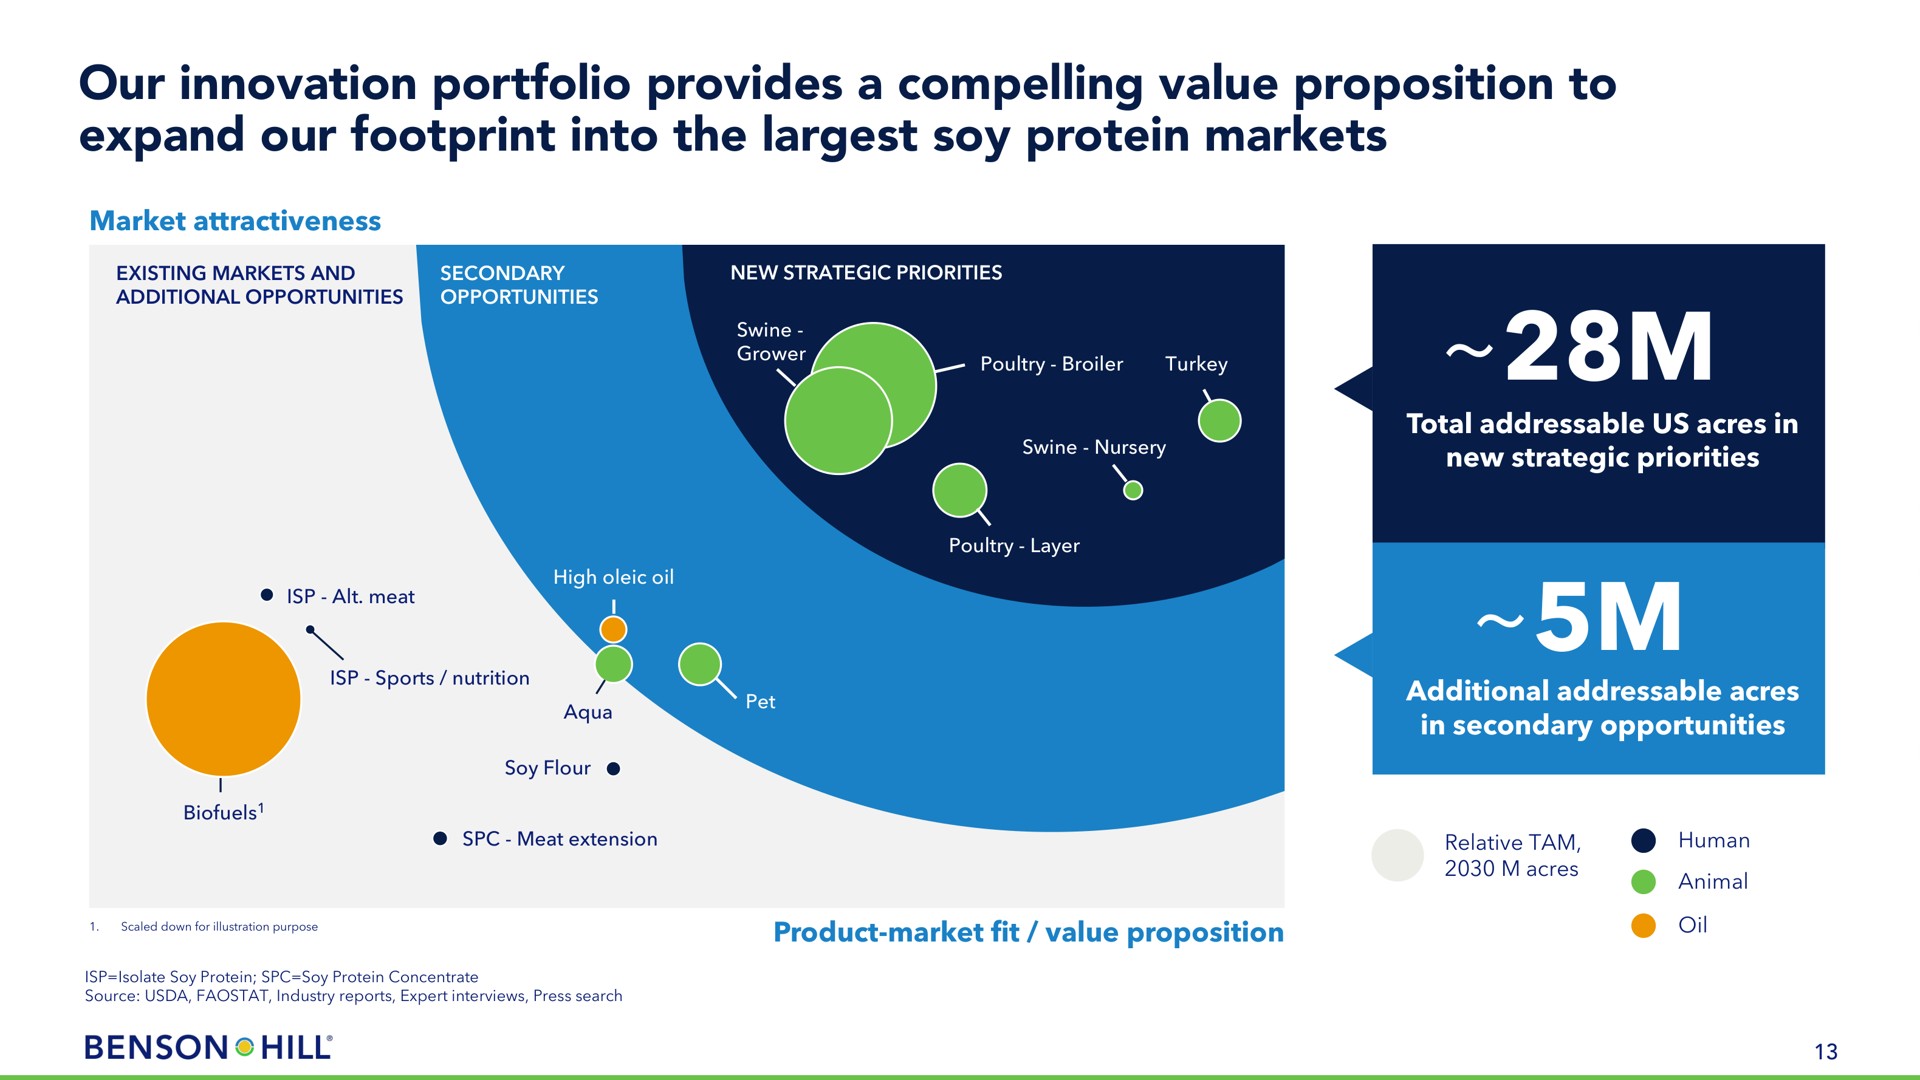 our innovation portfolio provides a compelling value proposition to expand our footprint into the soy protein markets | Benson Hill